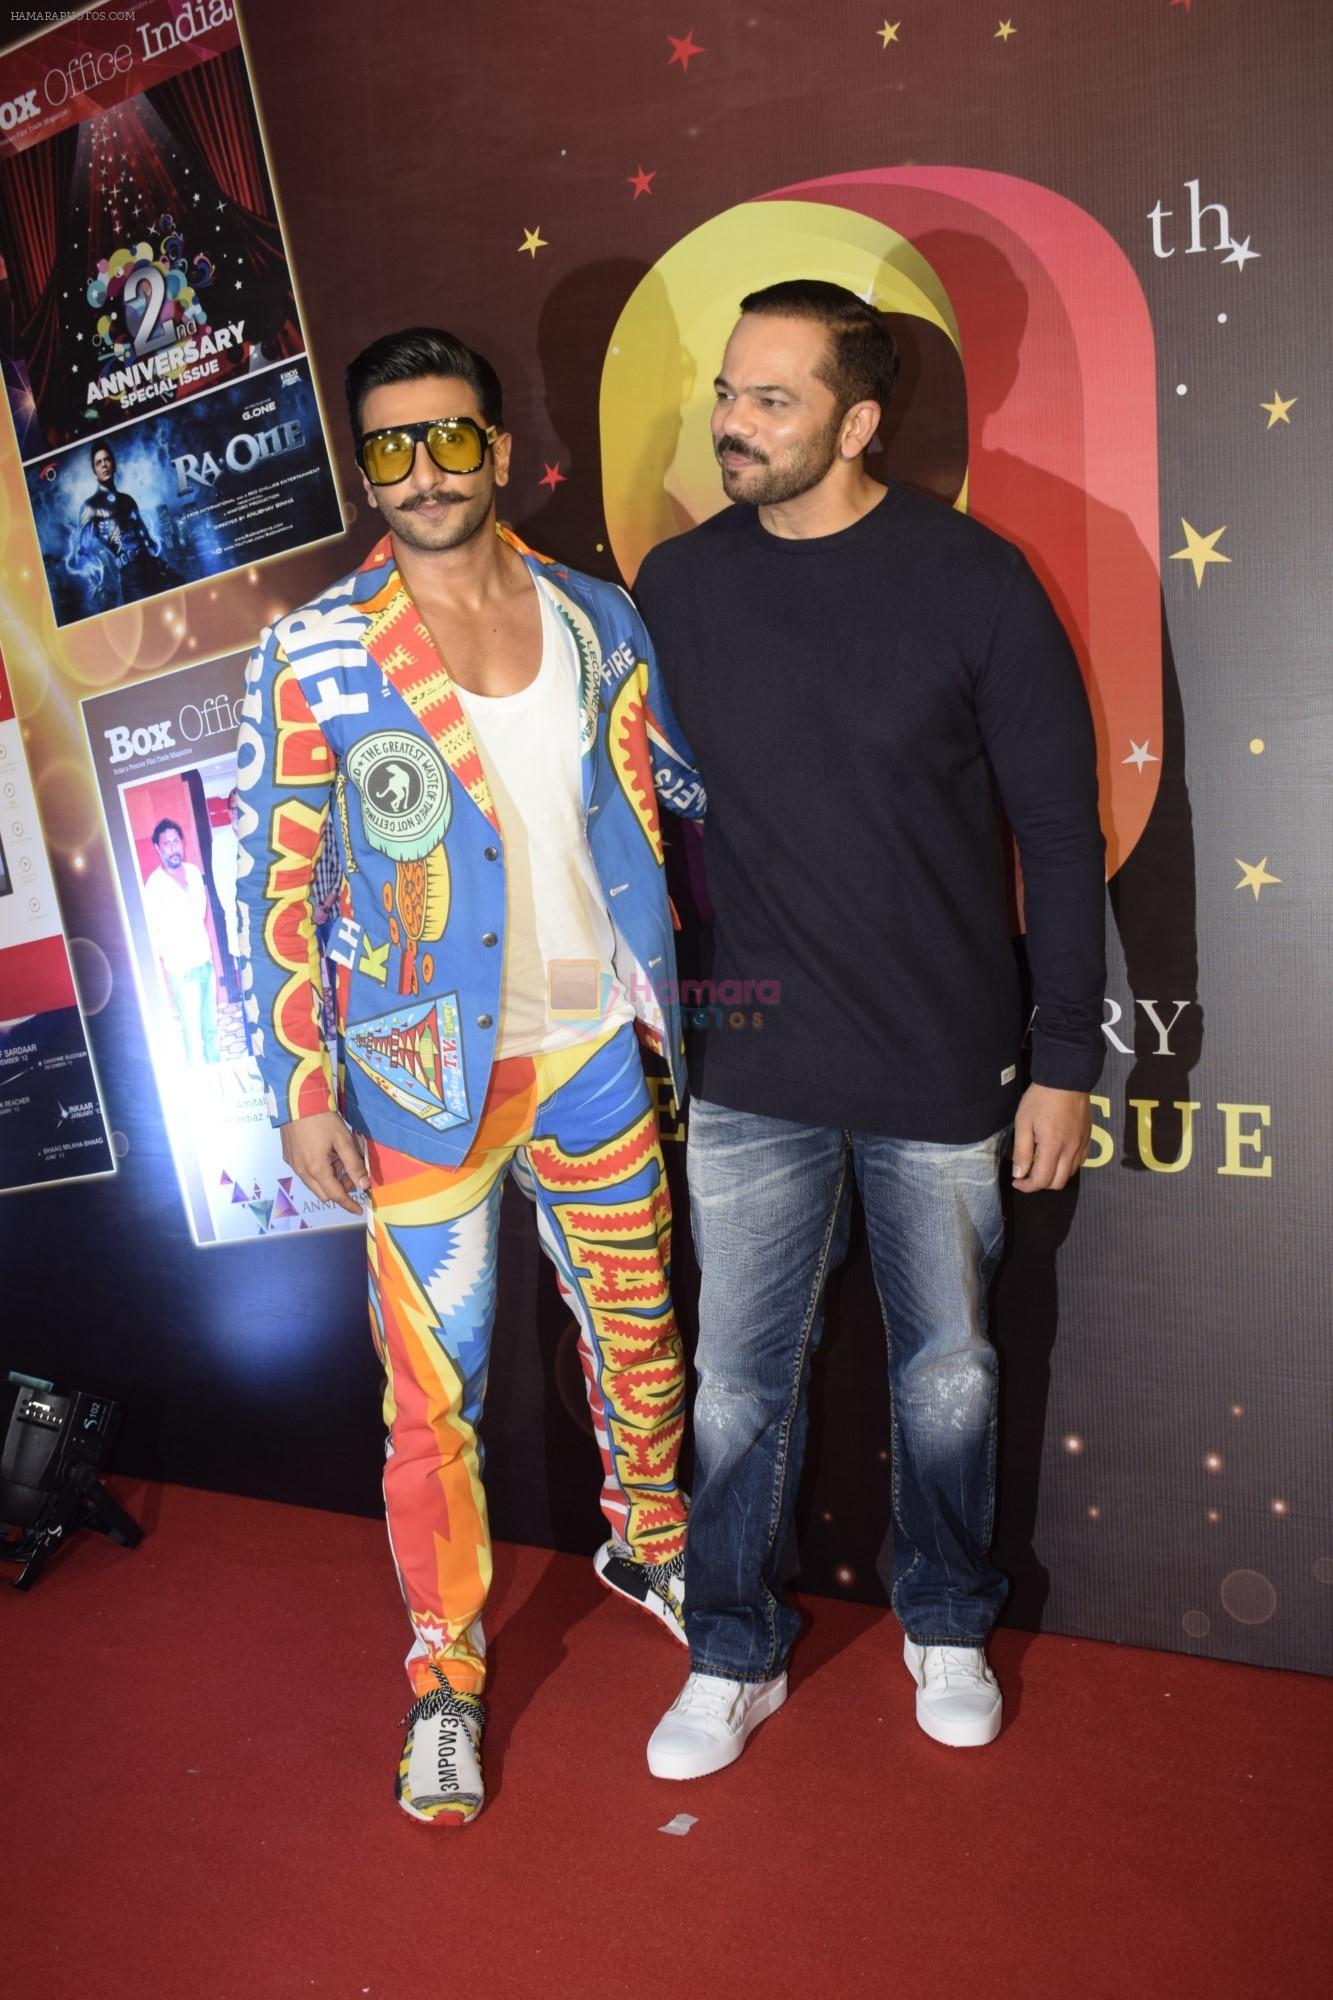 Ranveer Singh ,Rohit Shetty at the 9th anniversary cover launch of Boxoffice India magazine in Novotel juhu on 24th Sept 2018